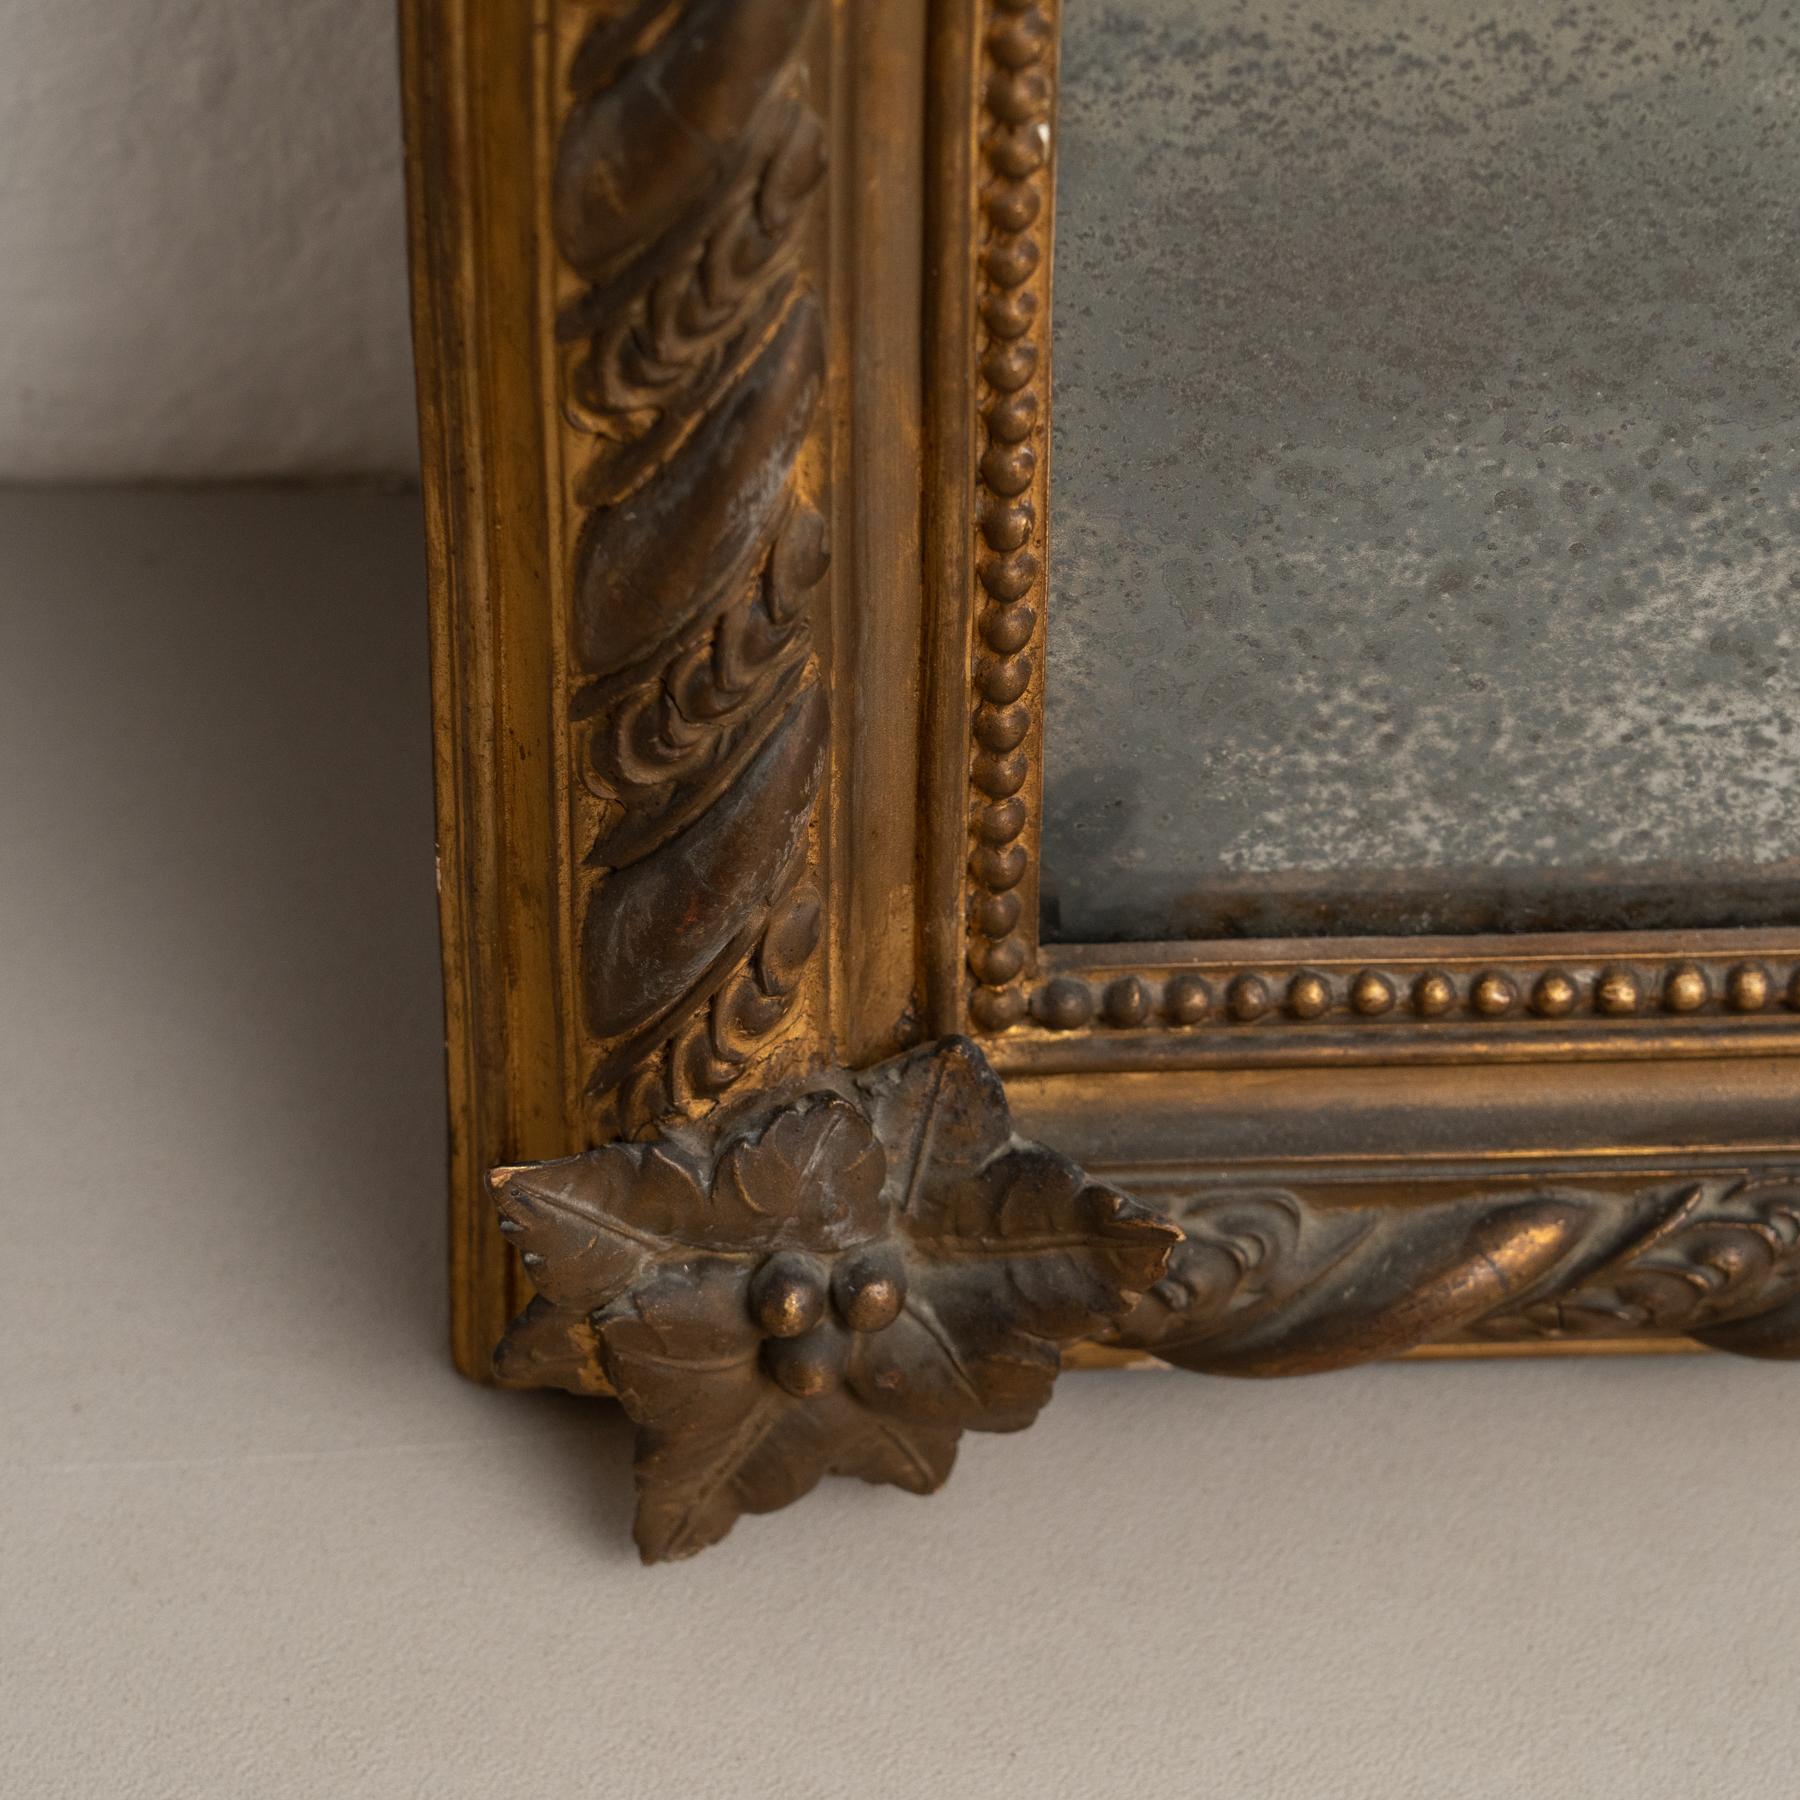 Antique Napoleon III Style Gilded Wood and Stucco Mirror, Early 20th Century For Sale 5